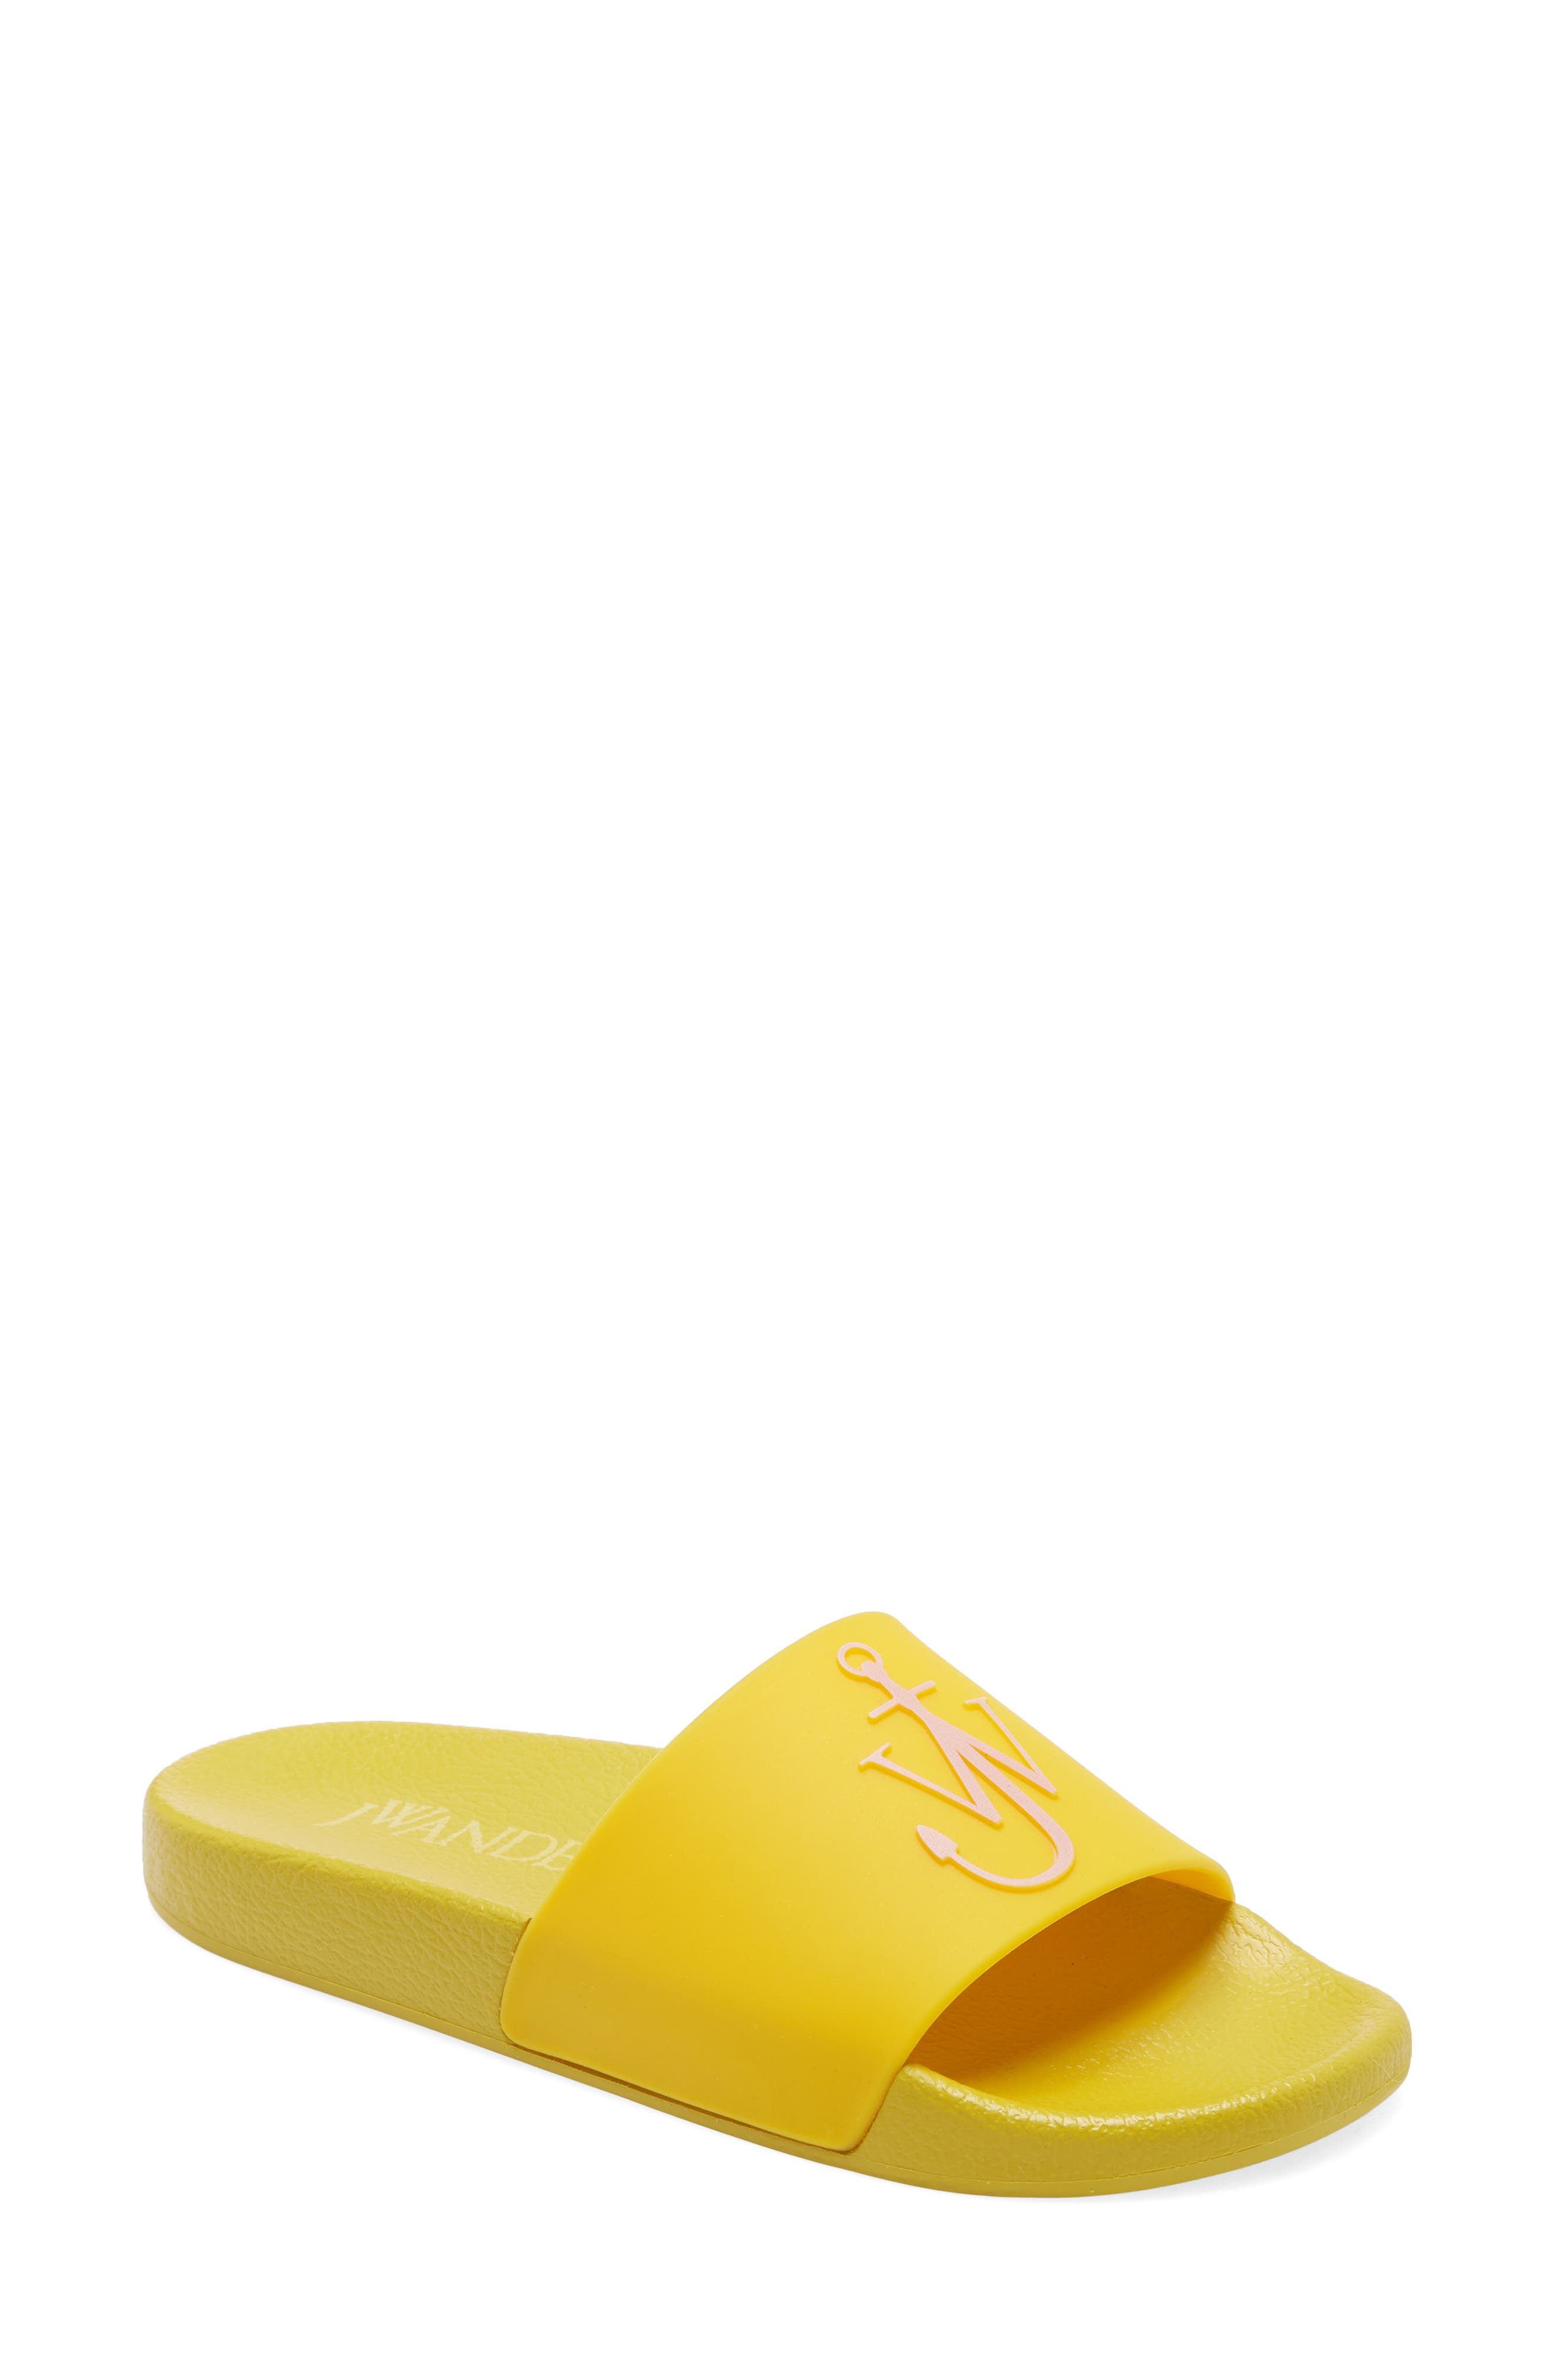 JW Anderson Logo Pool Slide Sandal in Bright Yellow at Nordstrom, Size 7Us